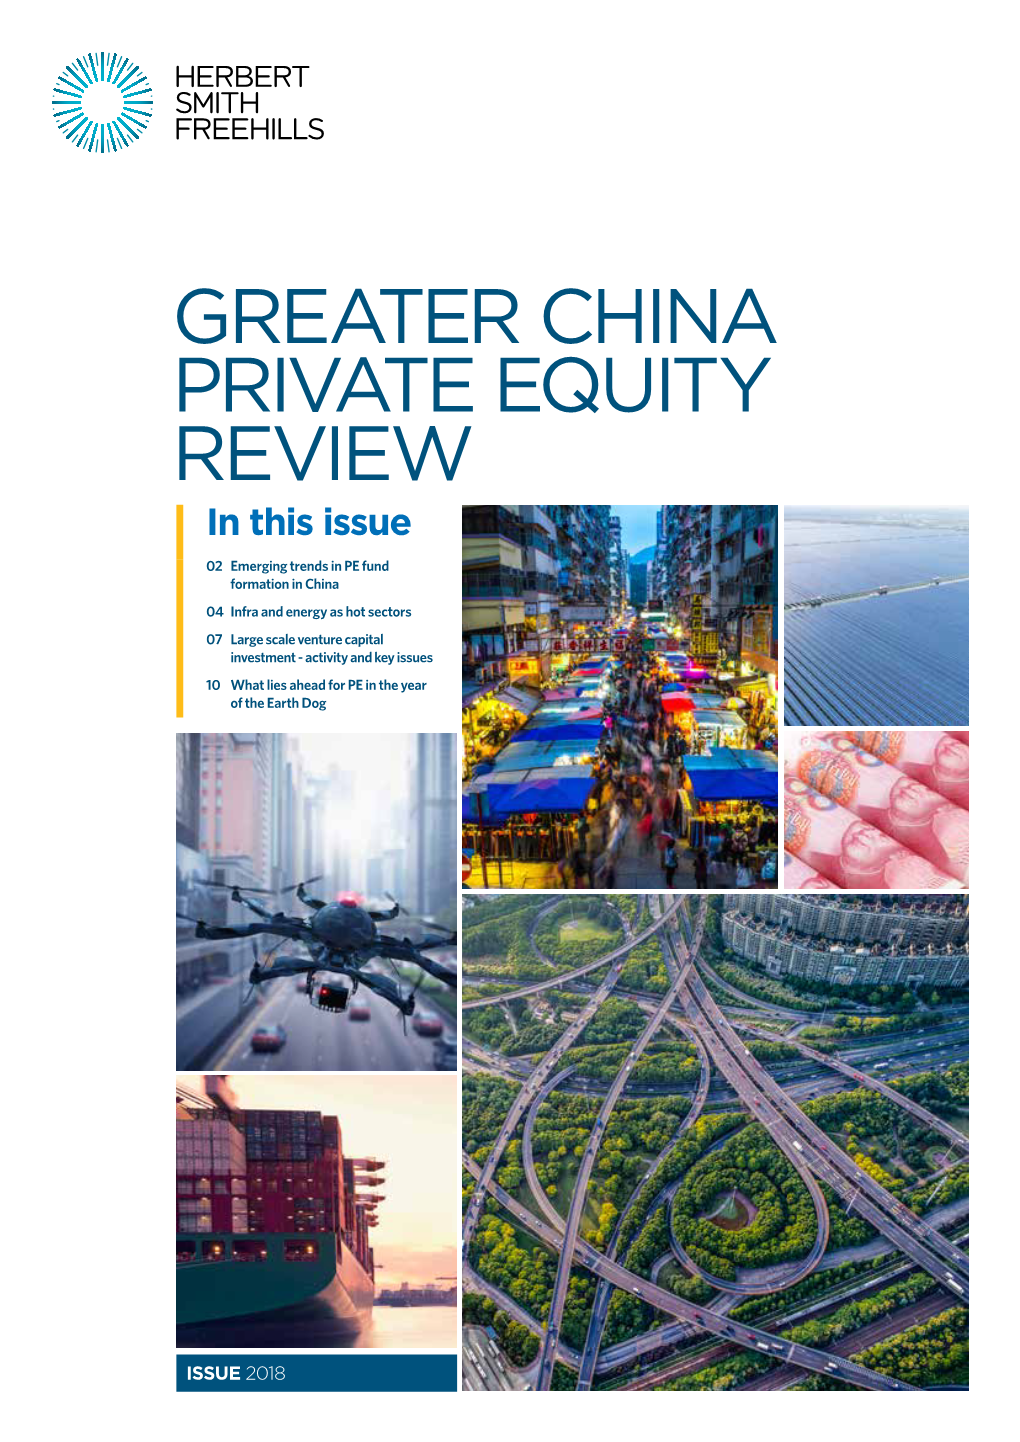 Greater China Private Equity Review